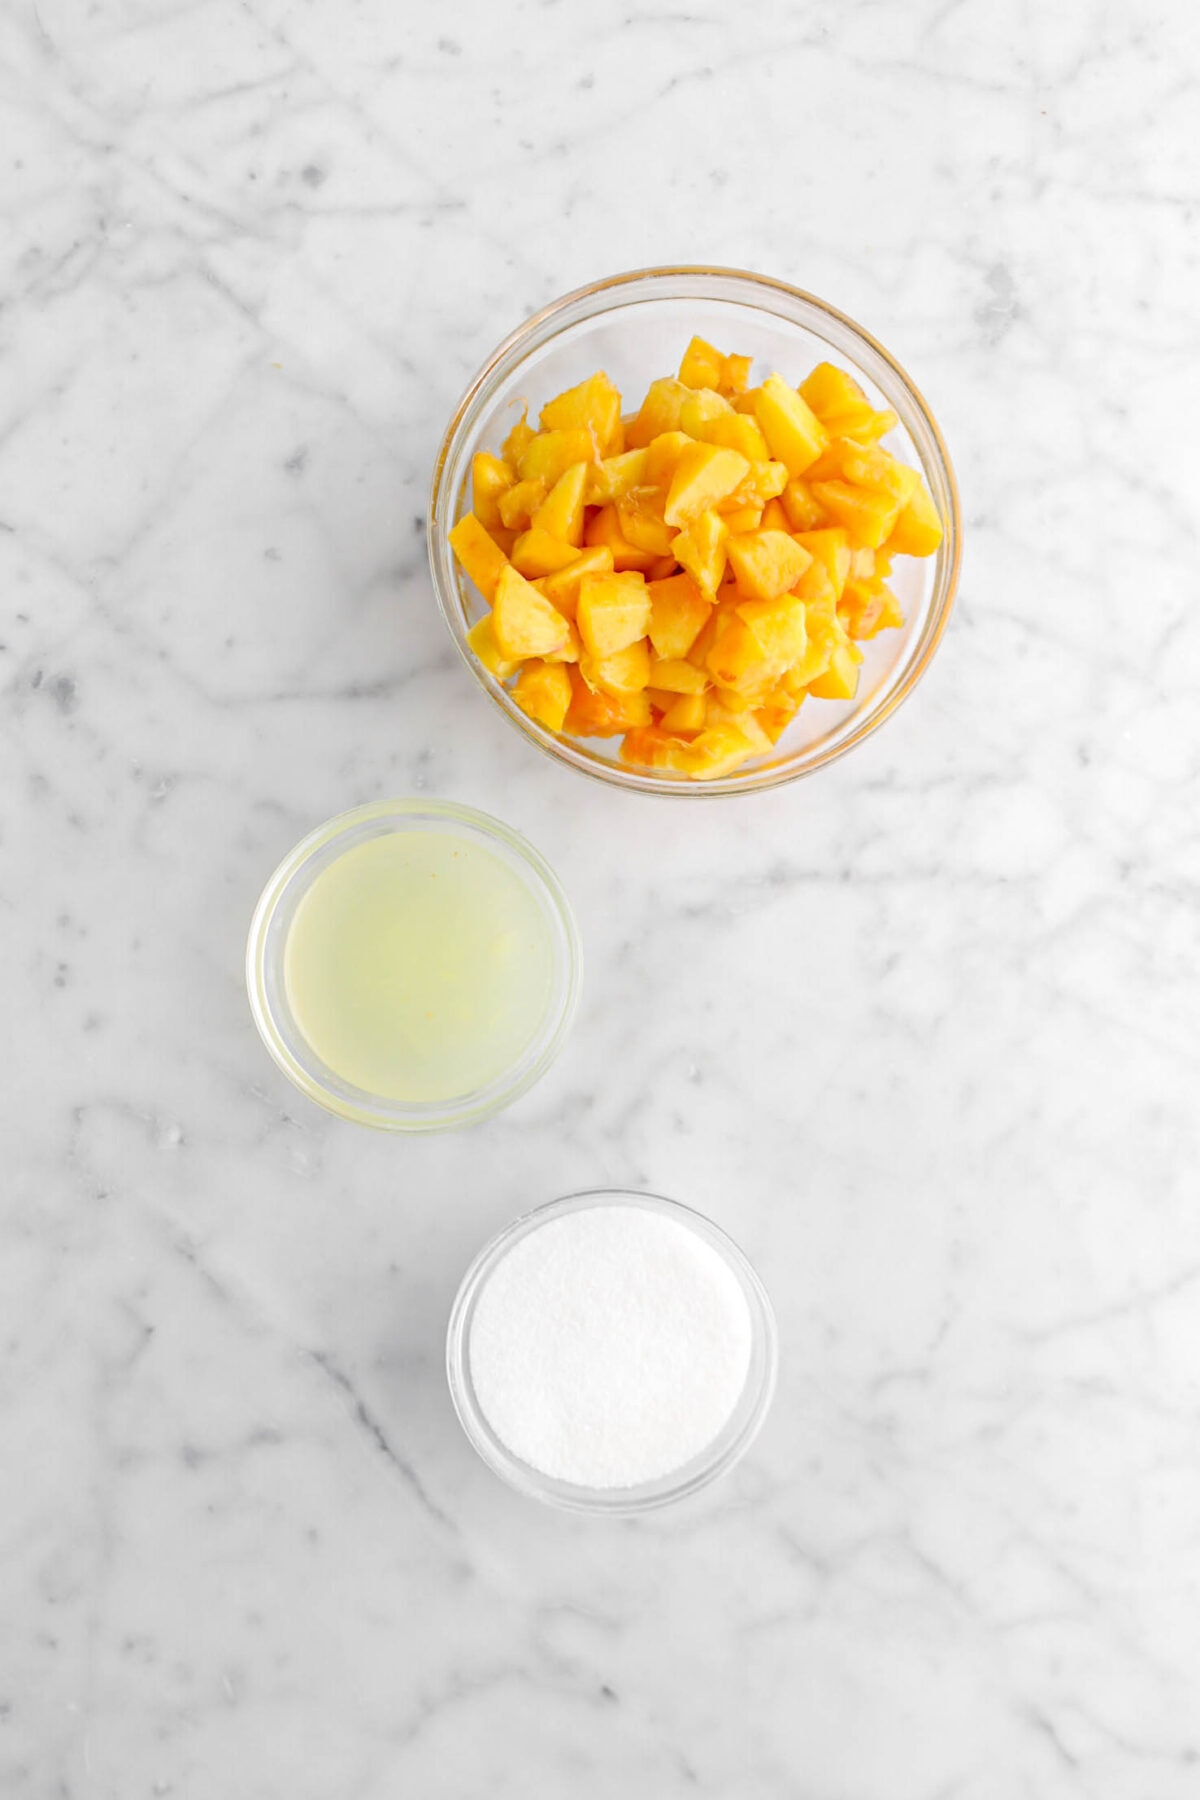 chopped peaches, lemon juice, and sugar on marble surface